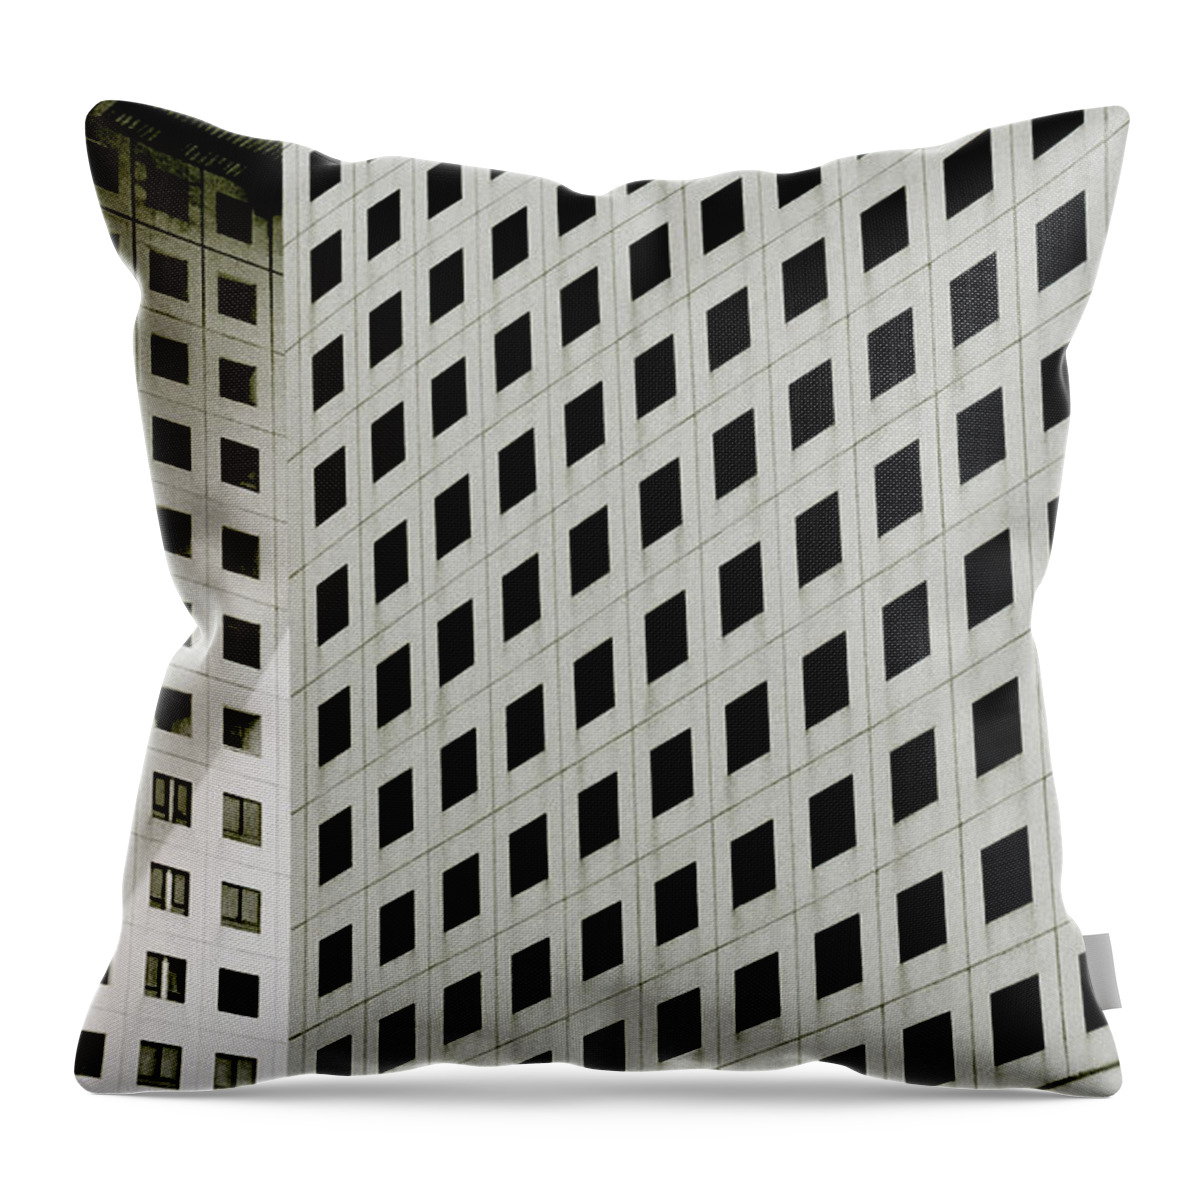 Geometry Throw Pillow featuring the photograph Graphic Construction In Thailand by Shaun Higson